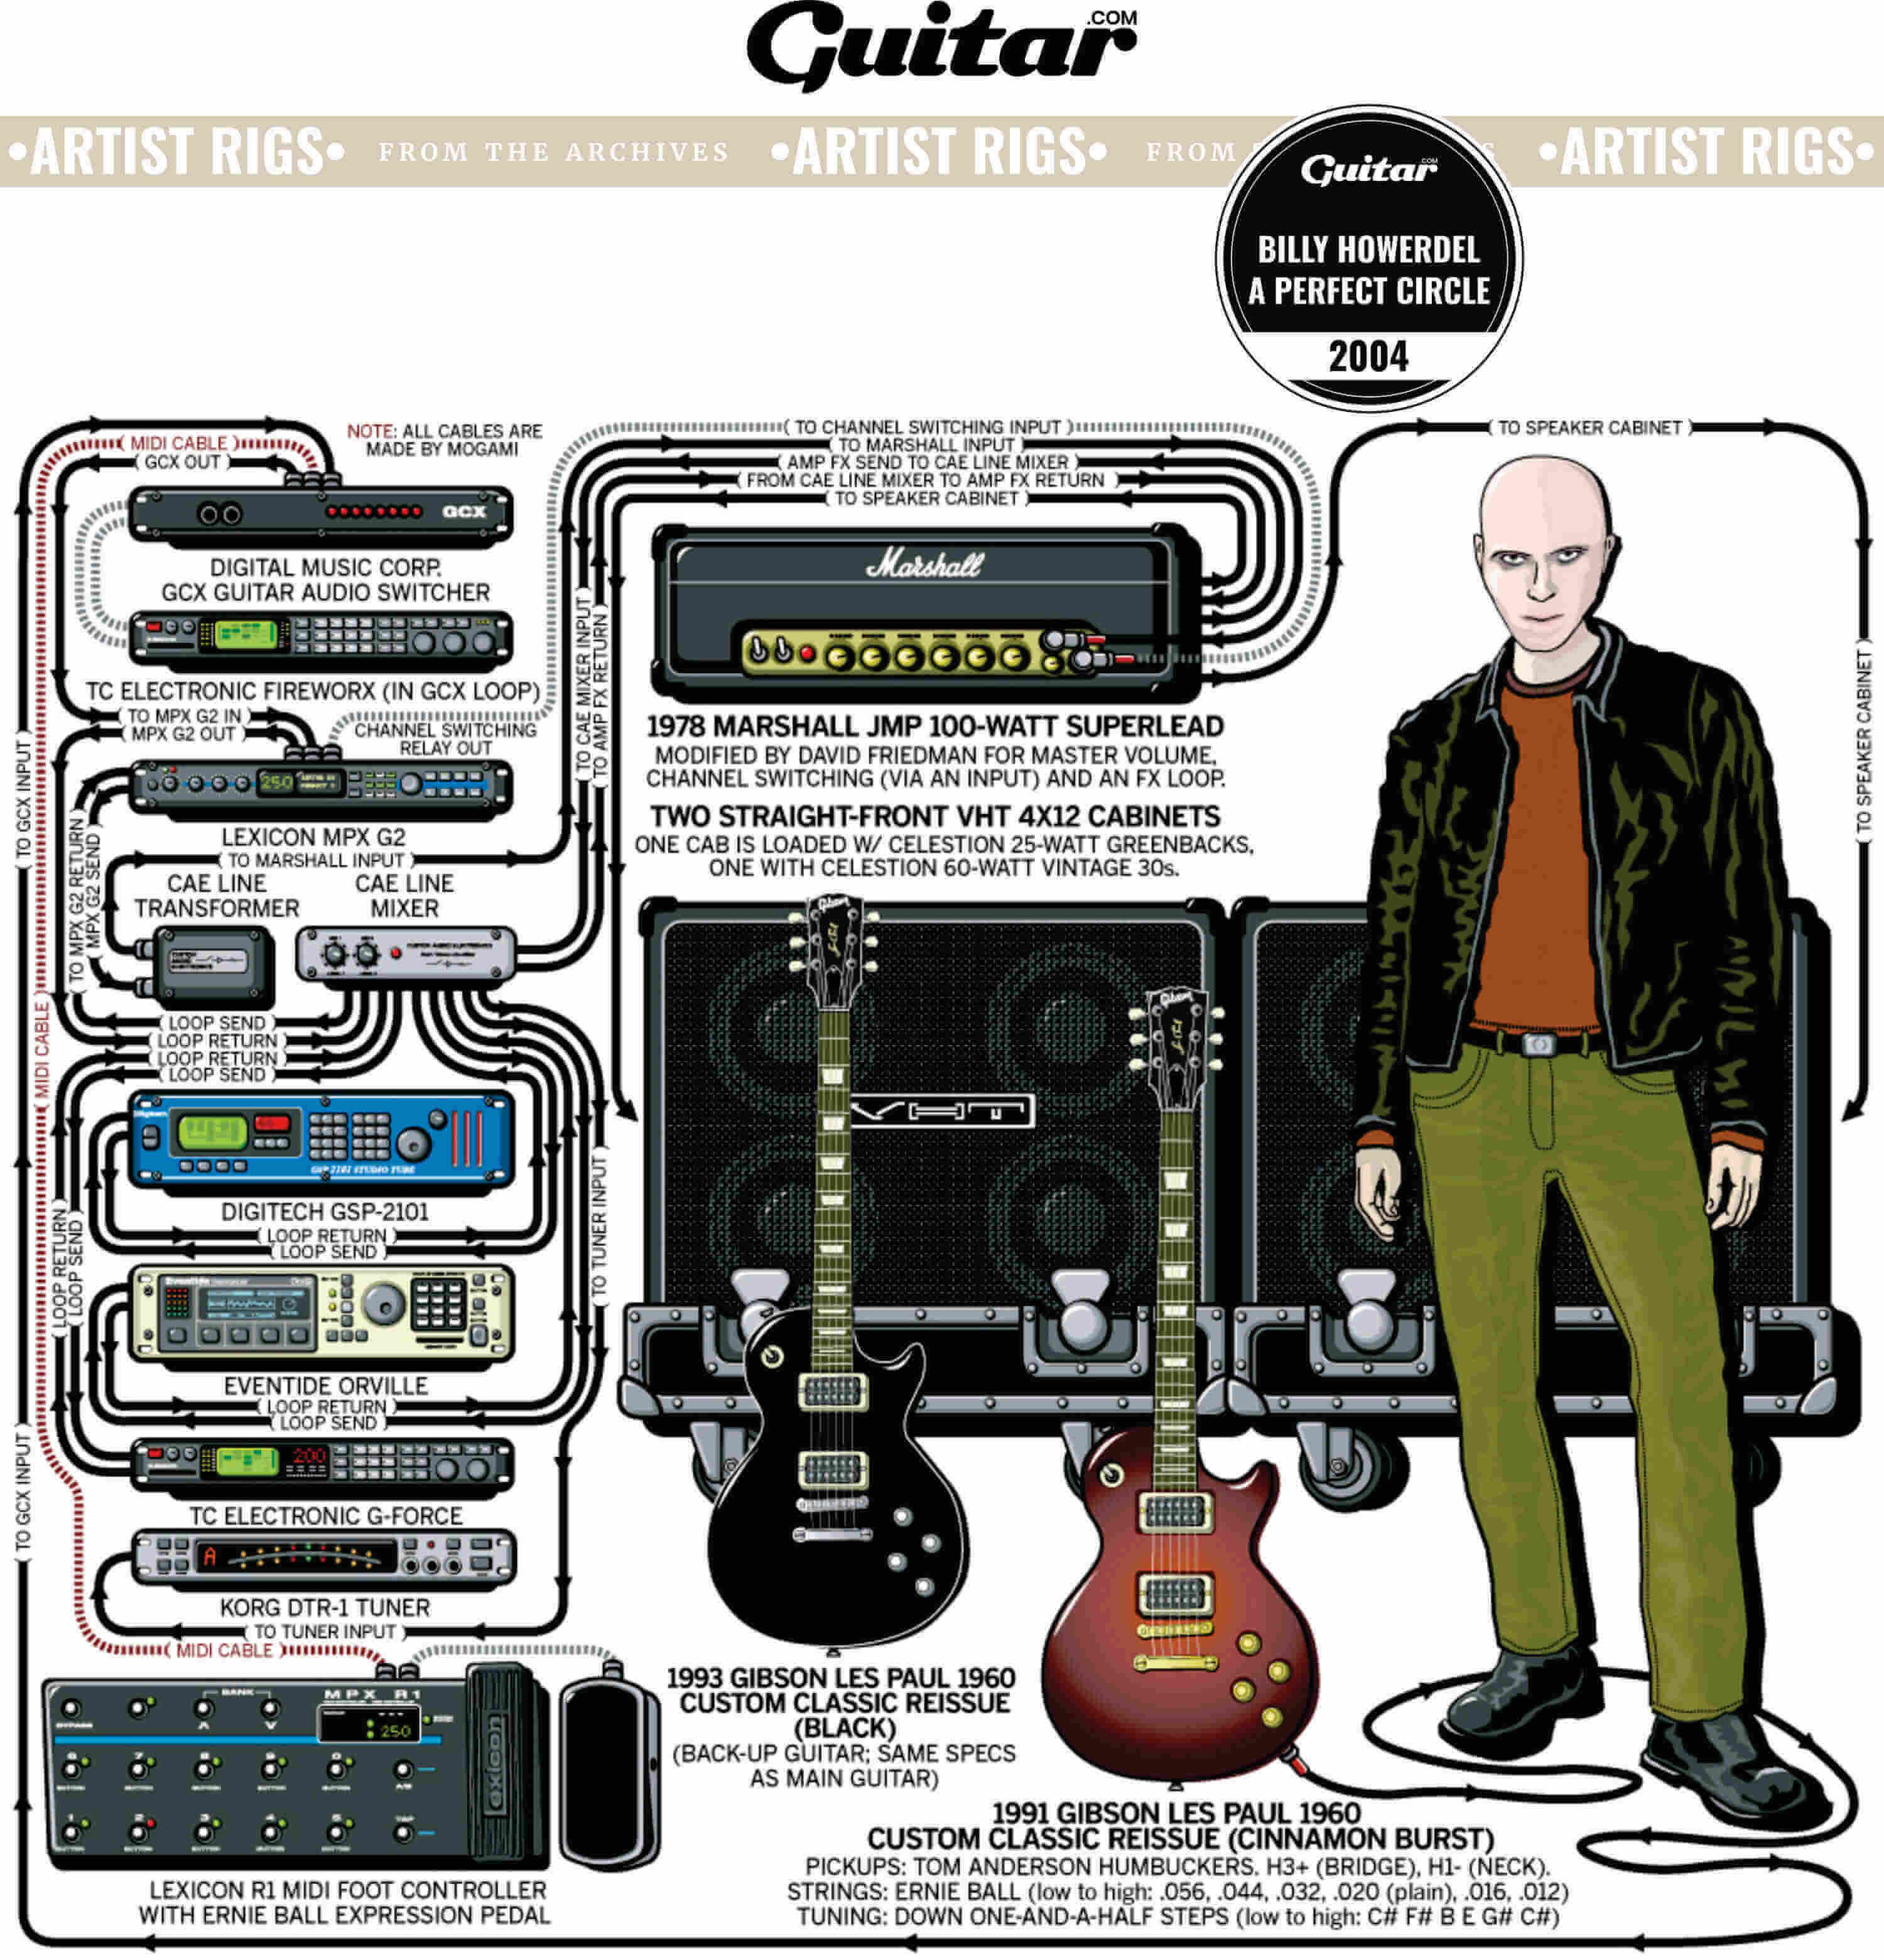 Rig Diagram: Billy Howerdel, A Perfect Circle (2004)